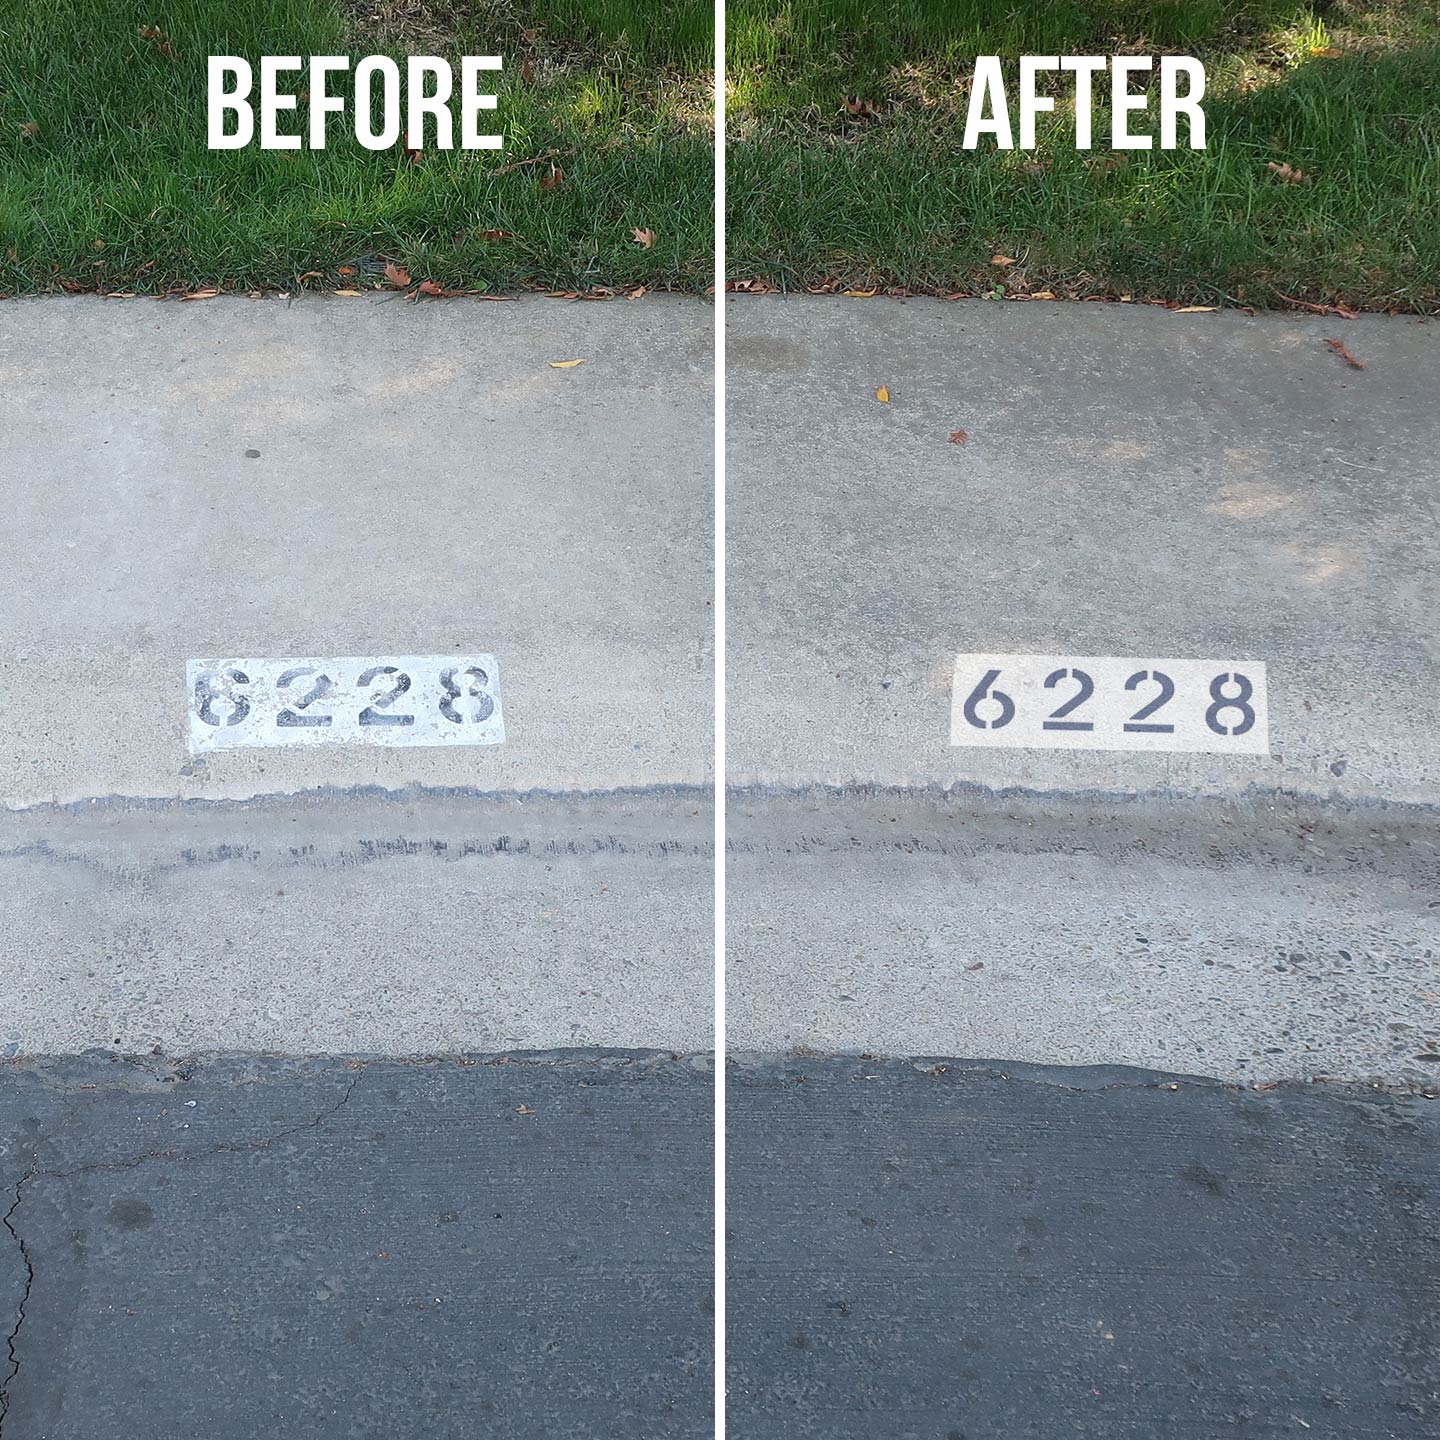 DIY: Home address curb painting with a logo - How to curb paint